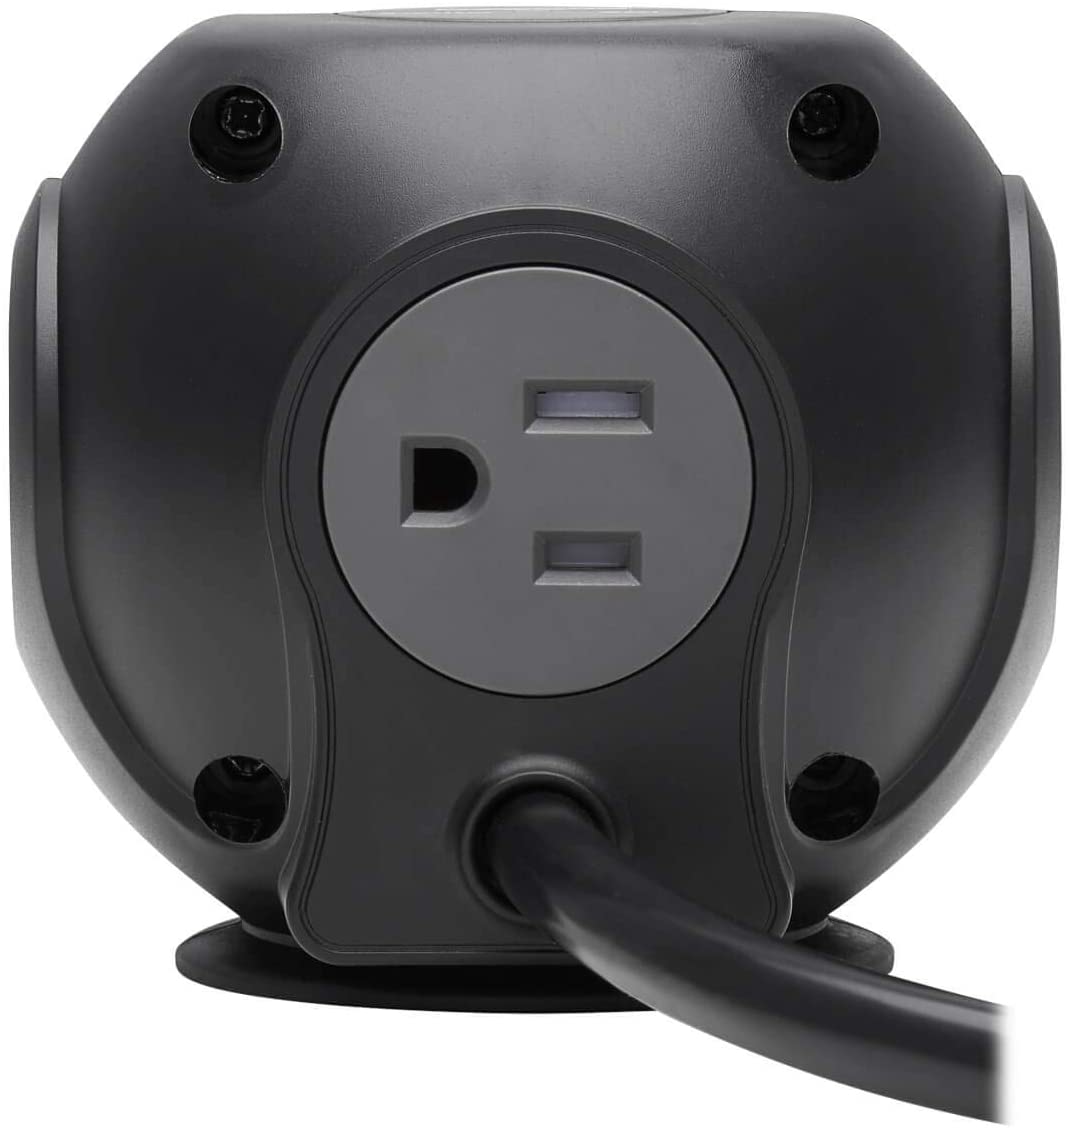 Tripp Lite Surge Protector 3-Outlet Spherical Surge Protector, 4 USB Ports (4.8A Shared) - 6-ft. (1.83 m) Cord, 5-15P Plug, 540 Joules, Black (TLP36USB)